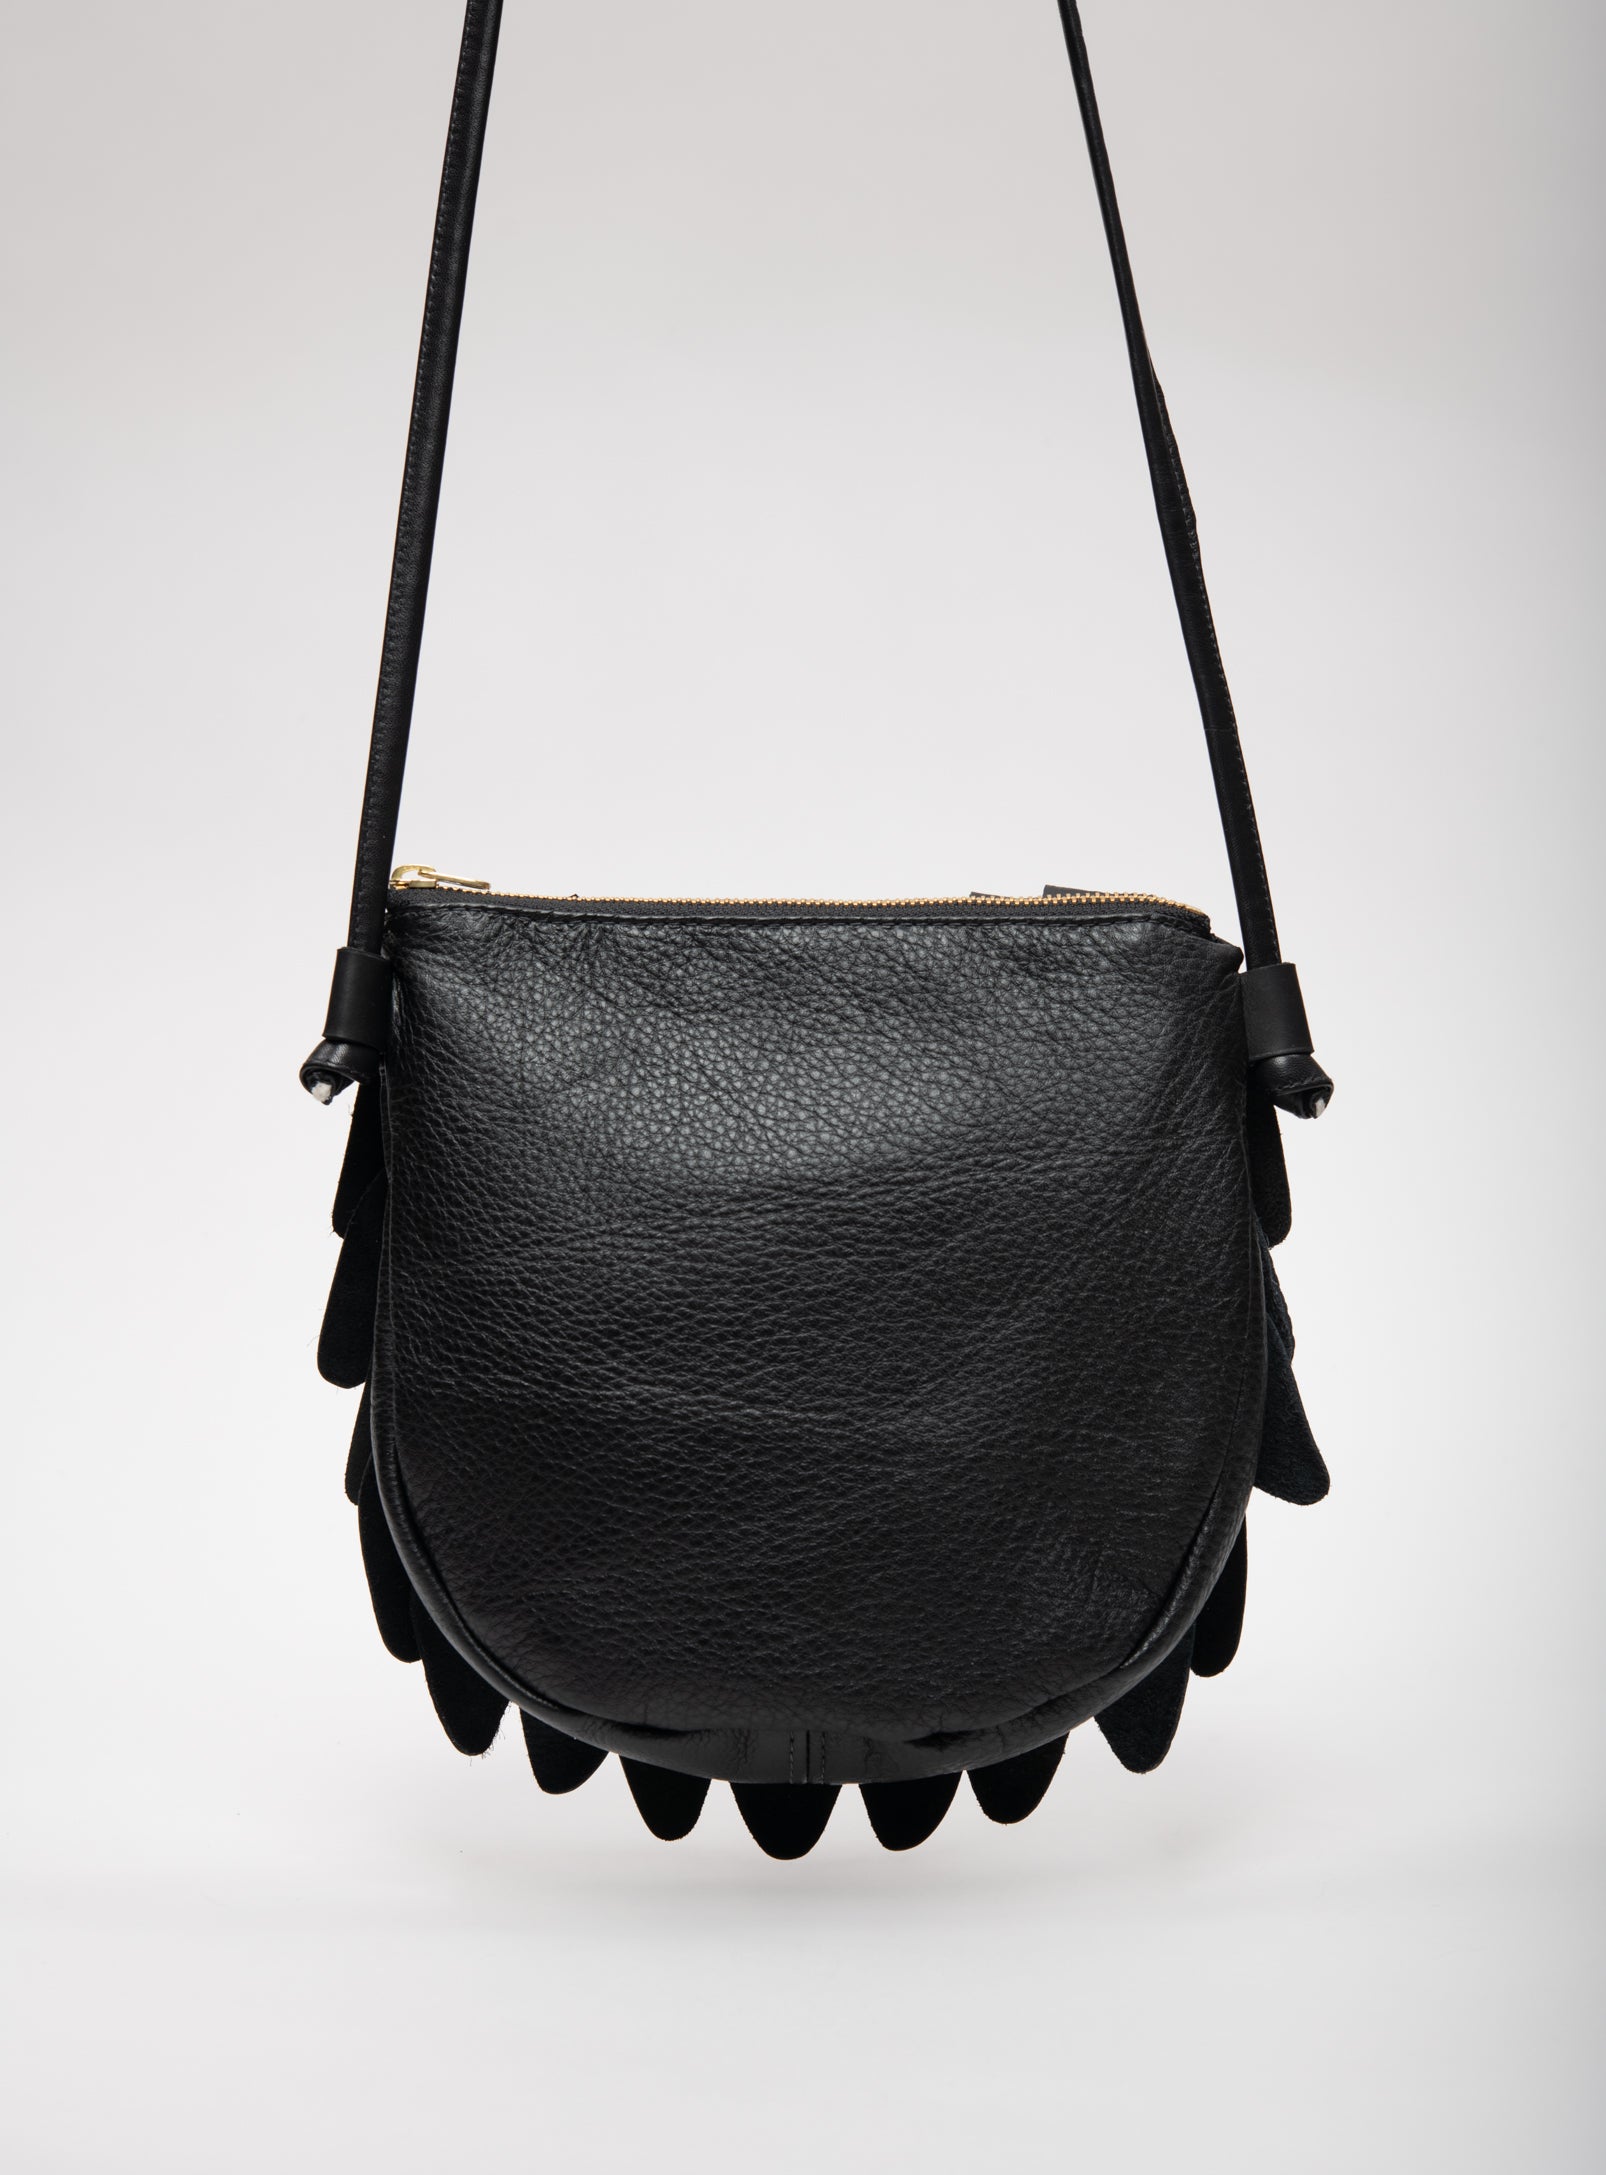 Veinage Wide multi-fringed leather pouch with shoulder strap PALOMA model, handmade in Montreal Canada